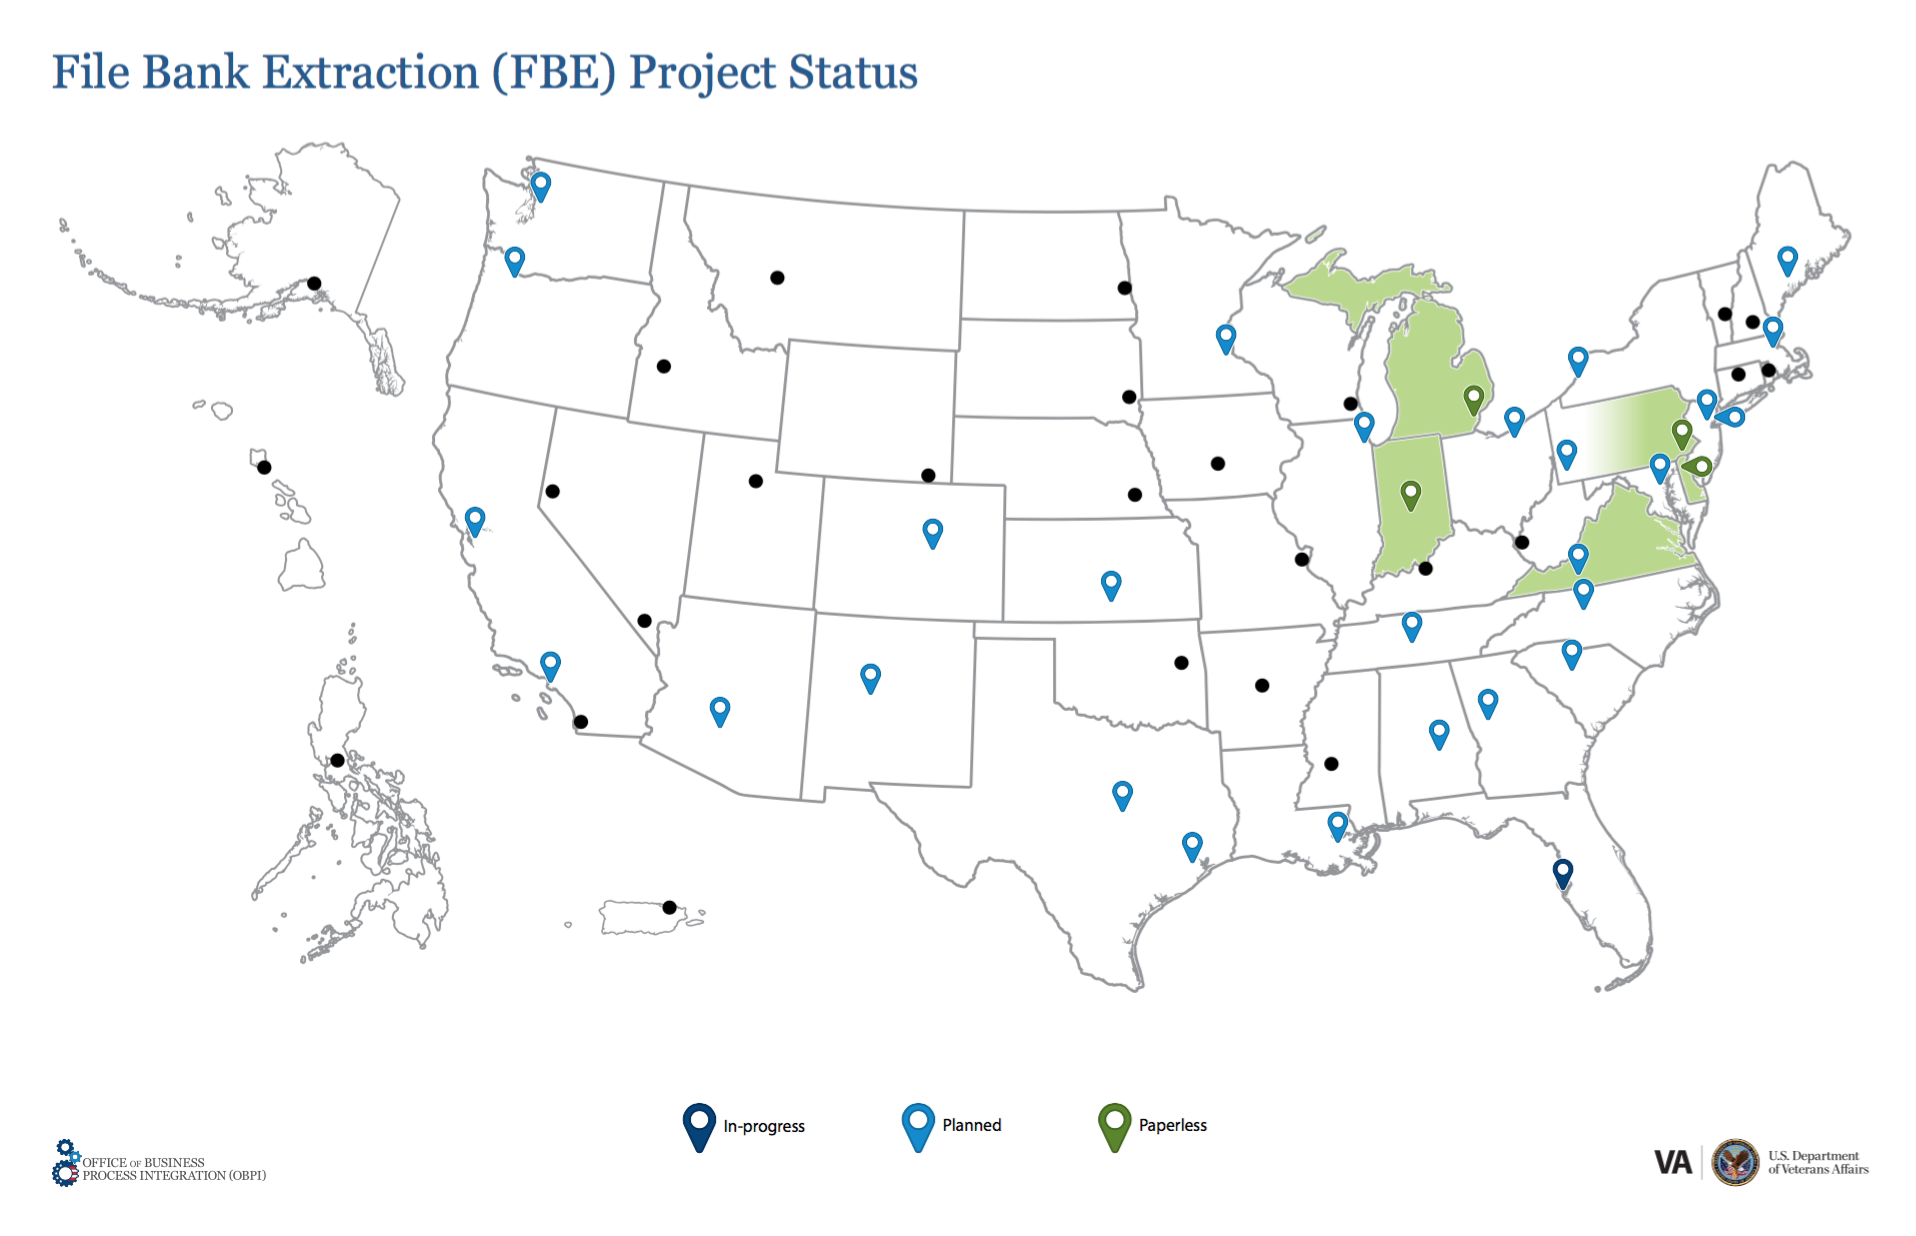 Map of filebank project locations